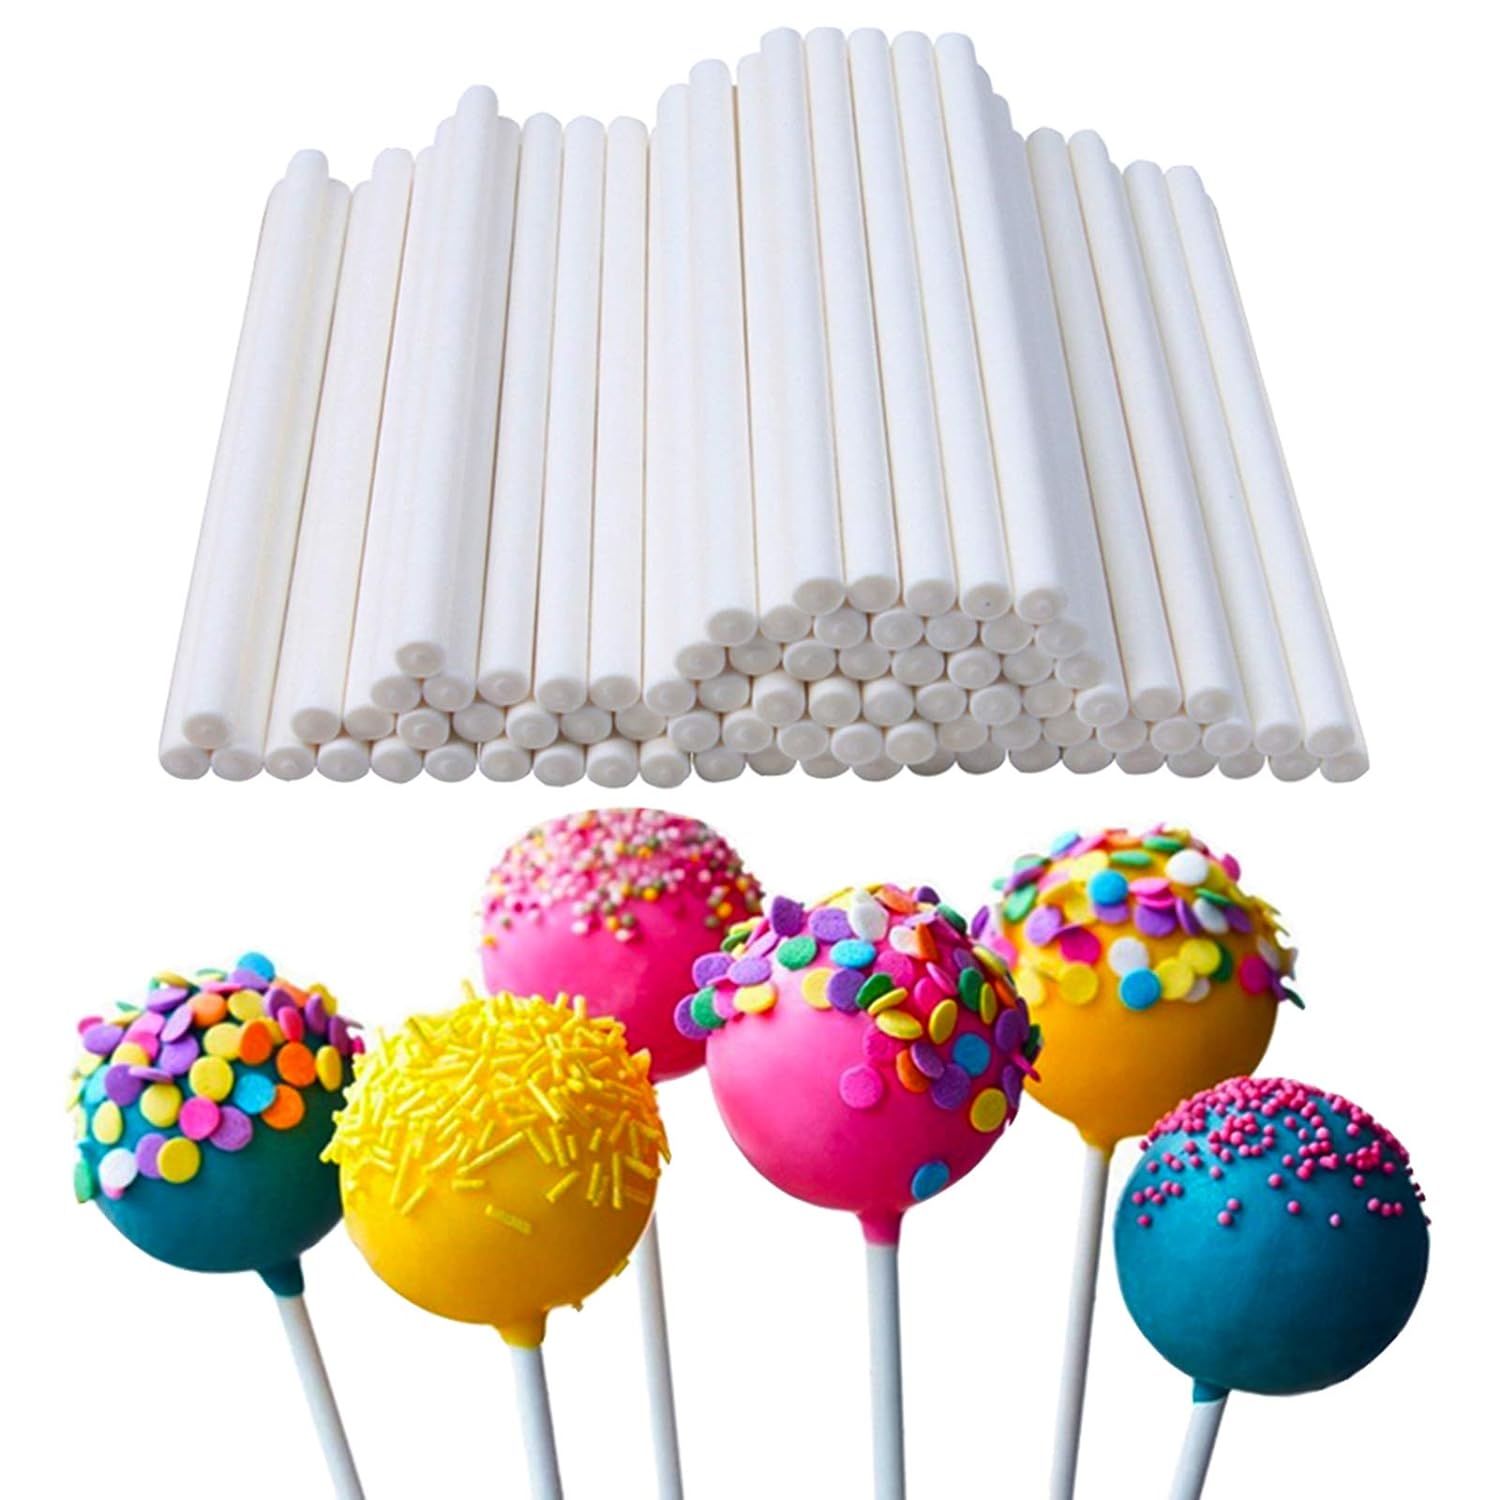 Lollypop Stick for Cake pop and Chocolates, 4.5 Inch